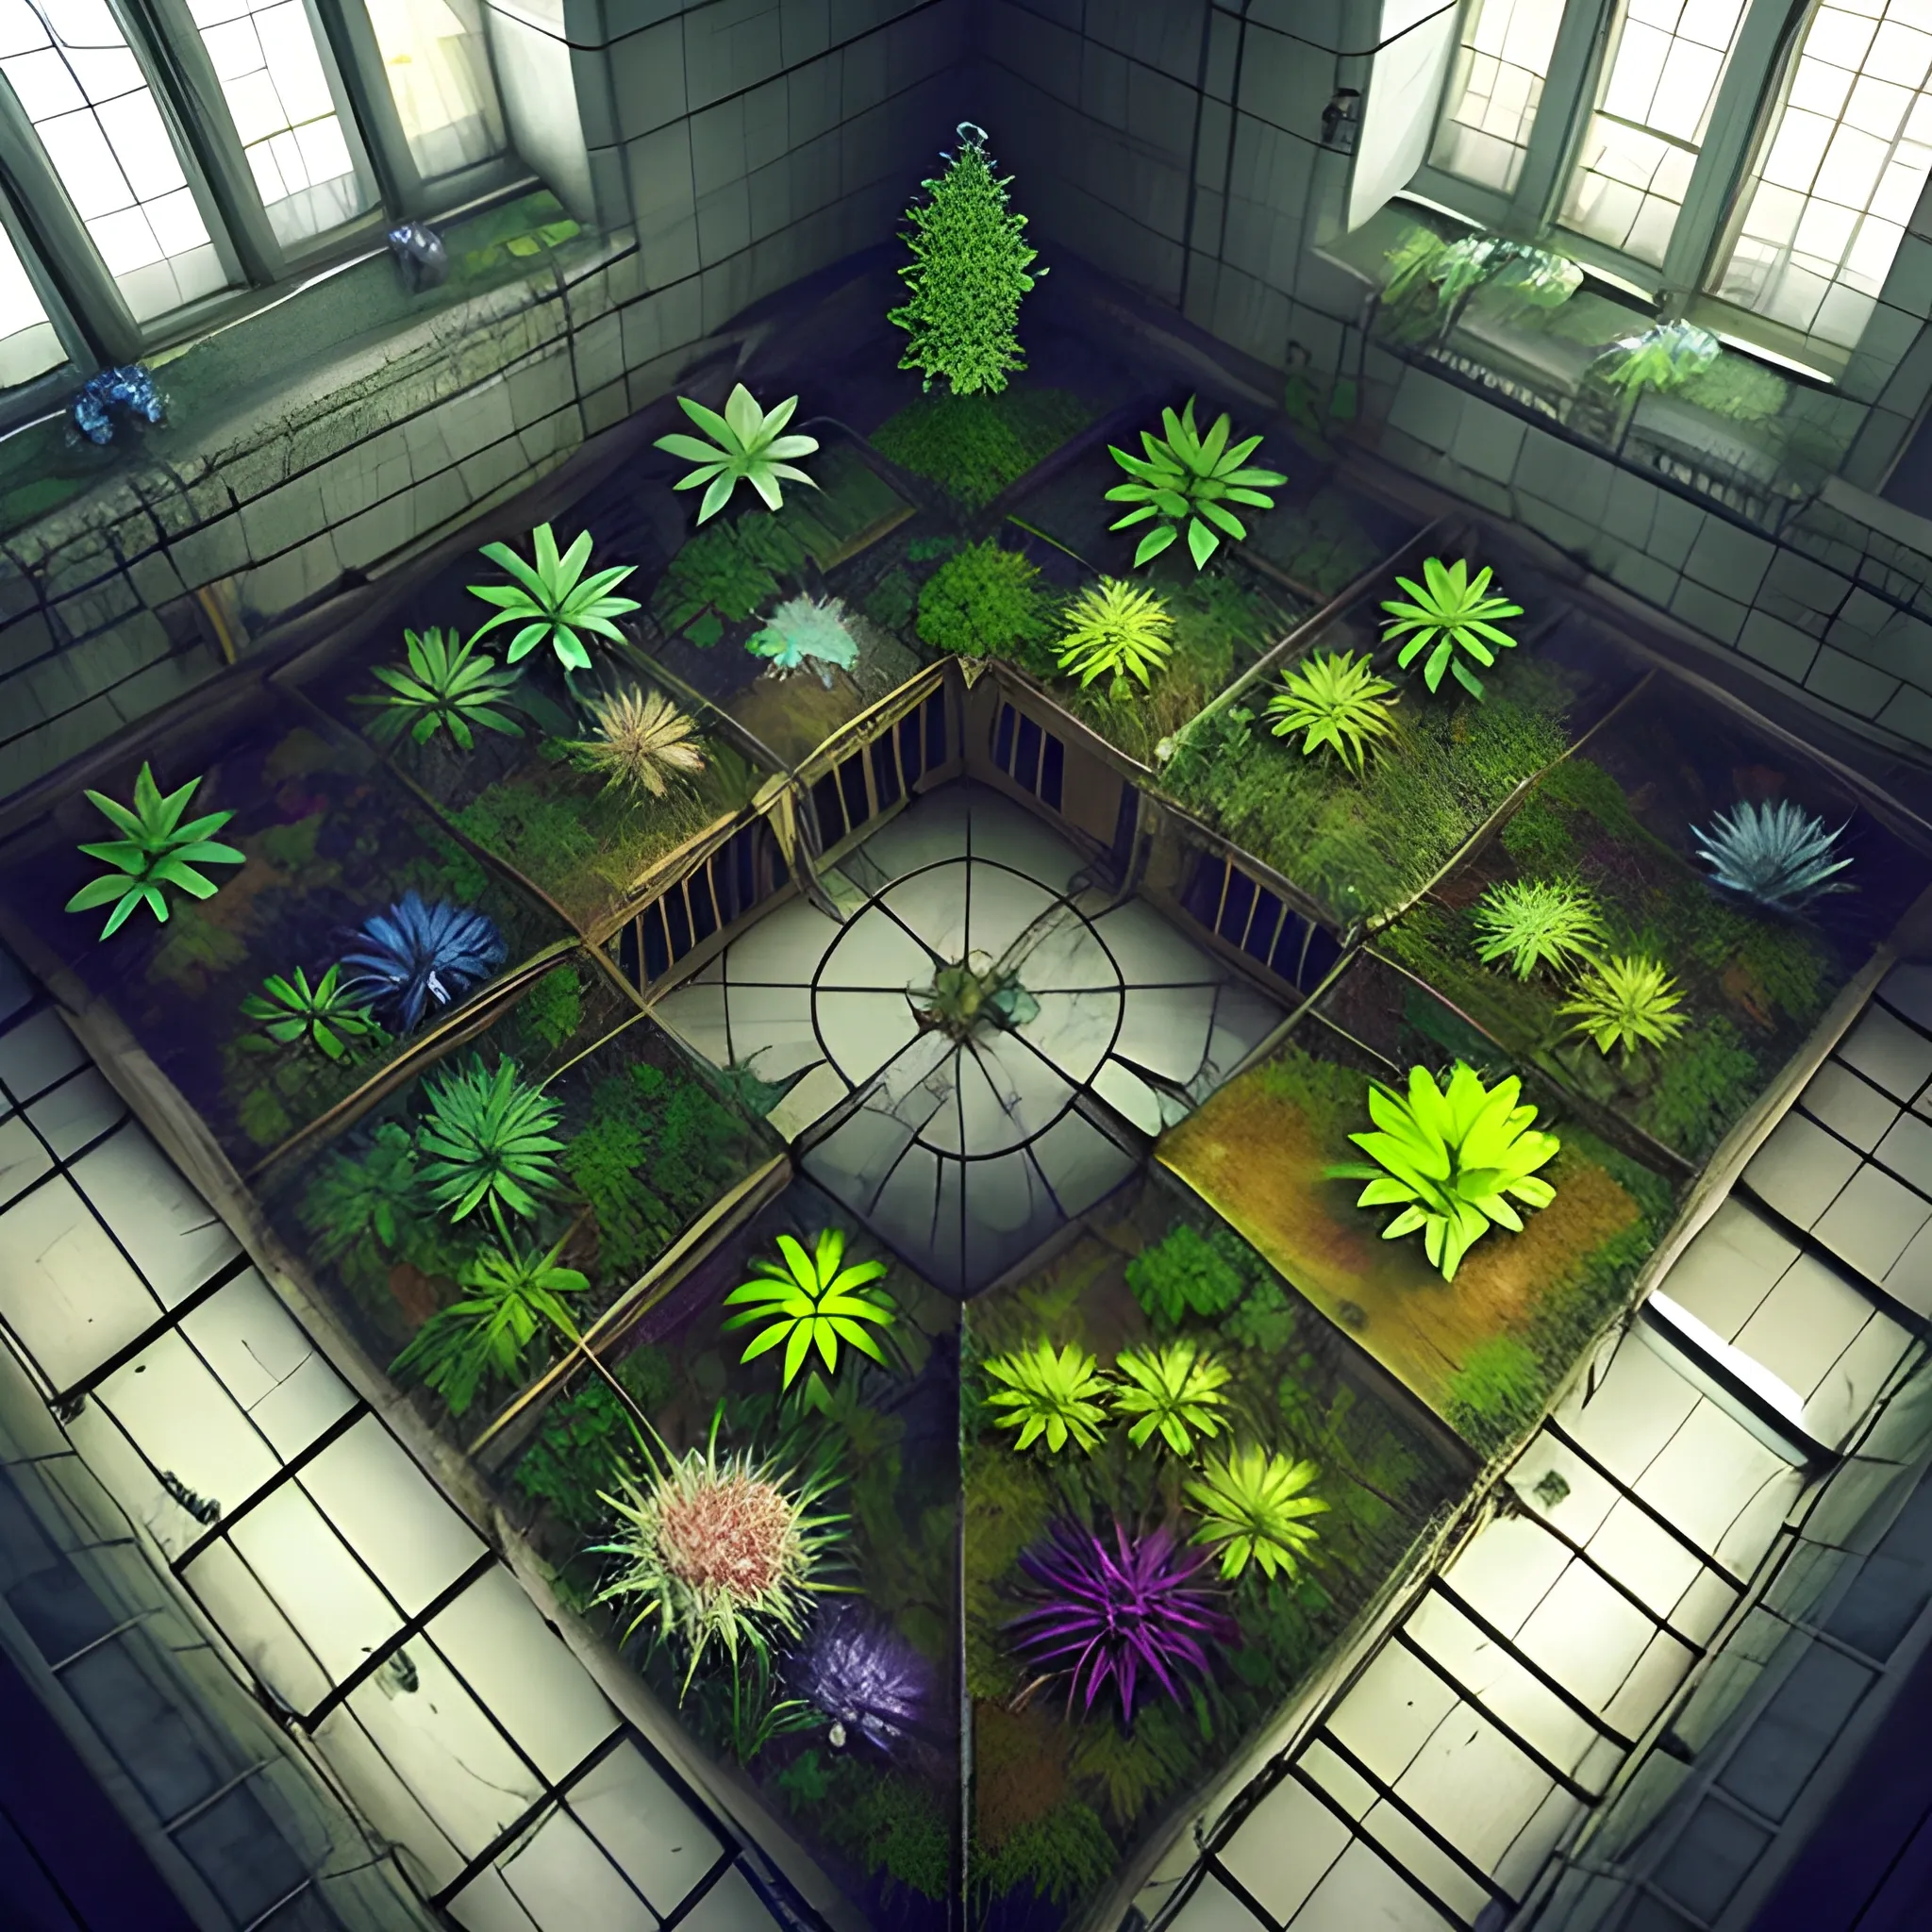 fantasy world plants and trees dying underground in prison not enough sunlight filtering down from above

